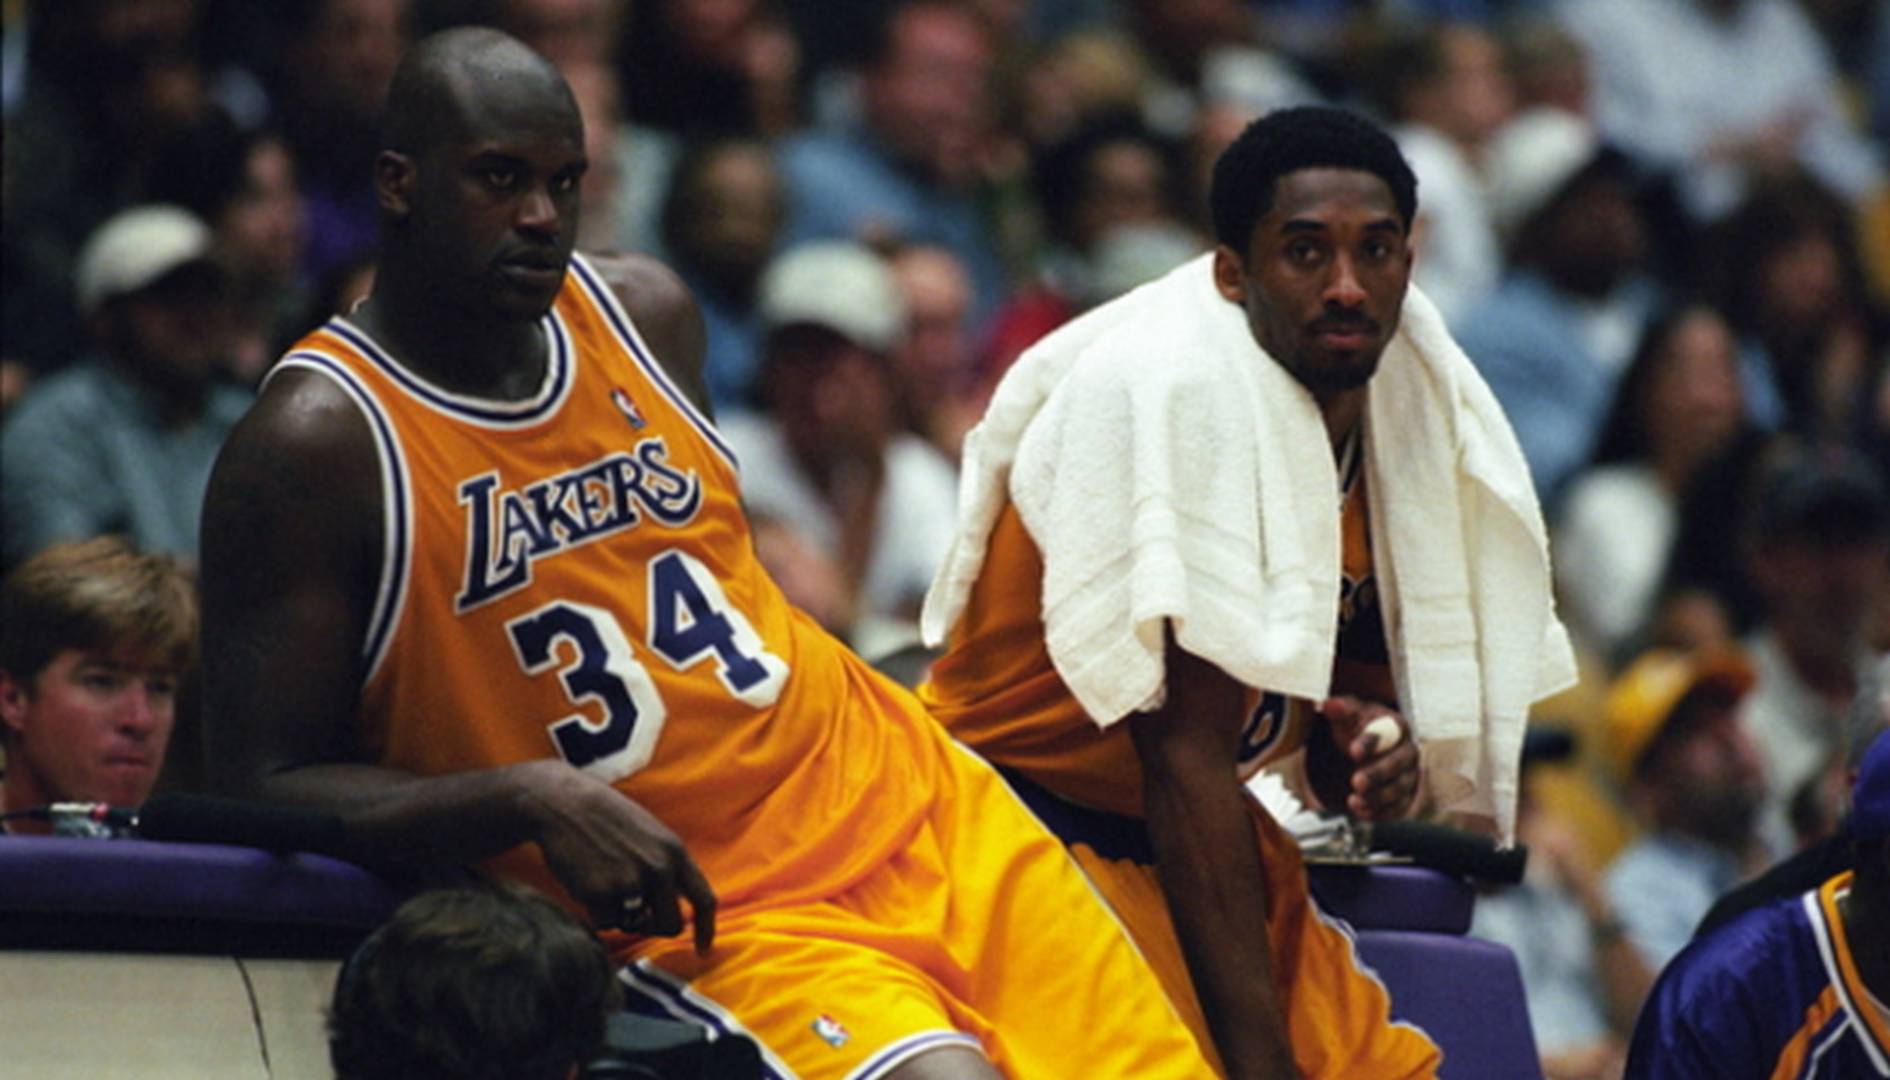 Shaquille O'Neal and Kobe Bryant of the Los Angeles Lakers during a National Basketball Association game at the Great Western Forum in Los Angeles, CA.